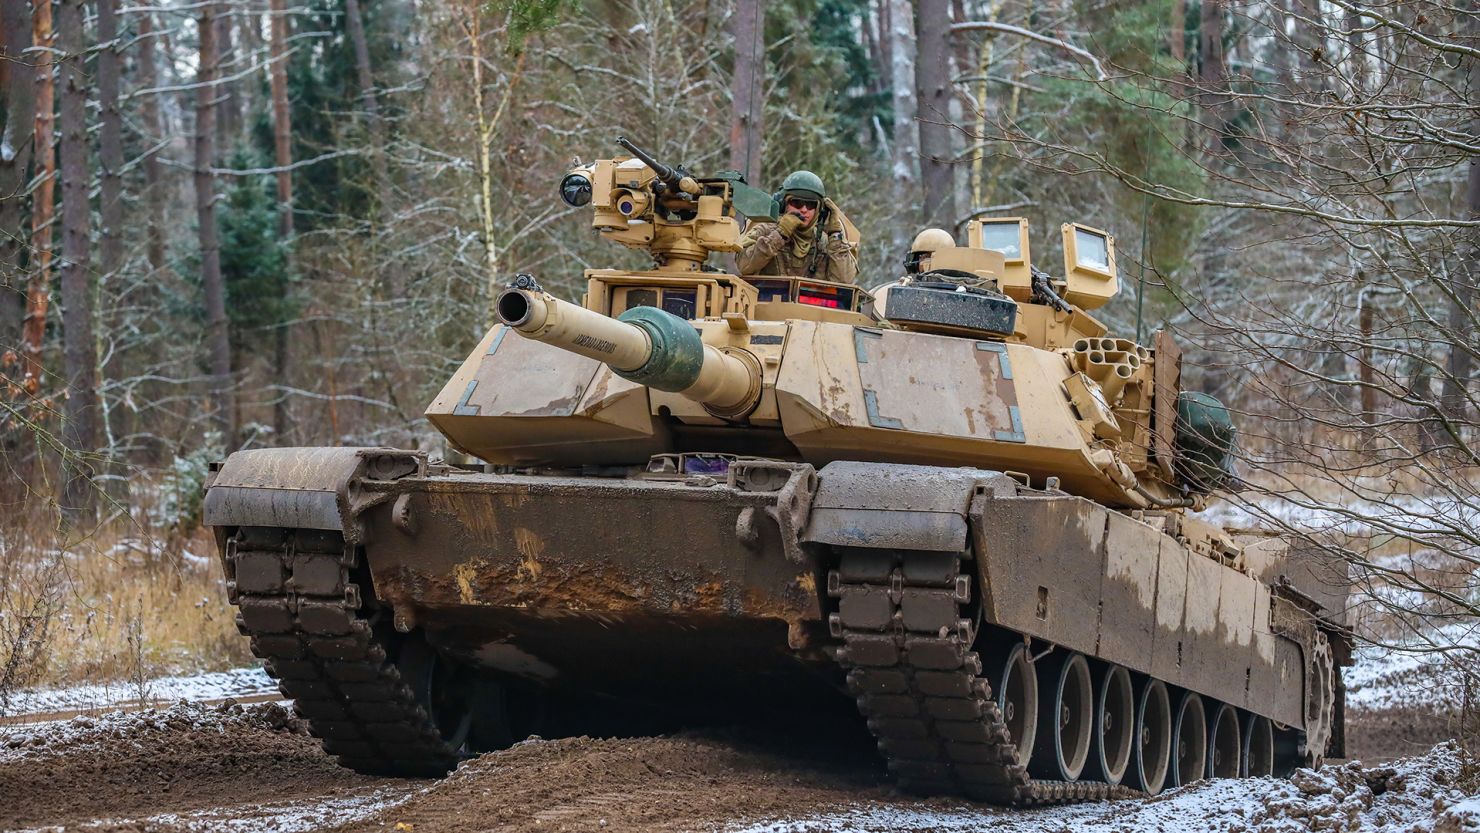 This Futuristic Unmanned Tank Could Be A Game Changer For The US Army